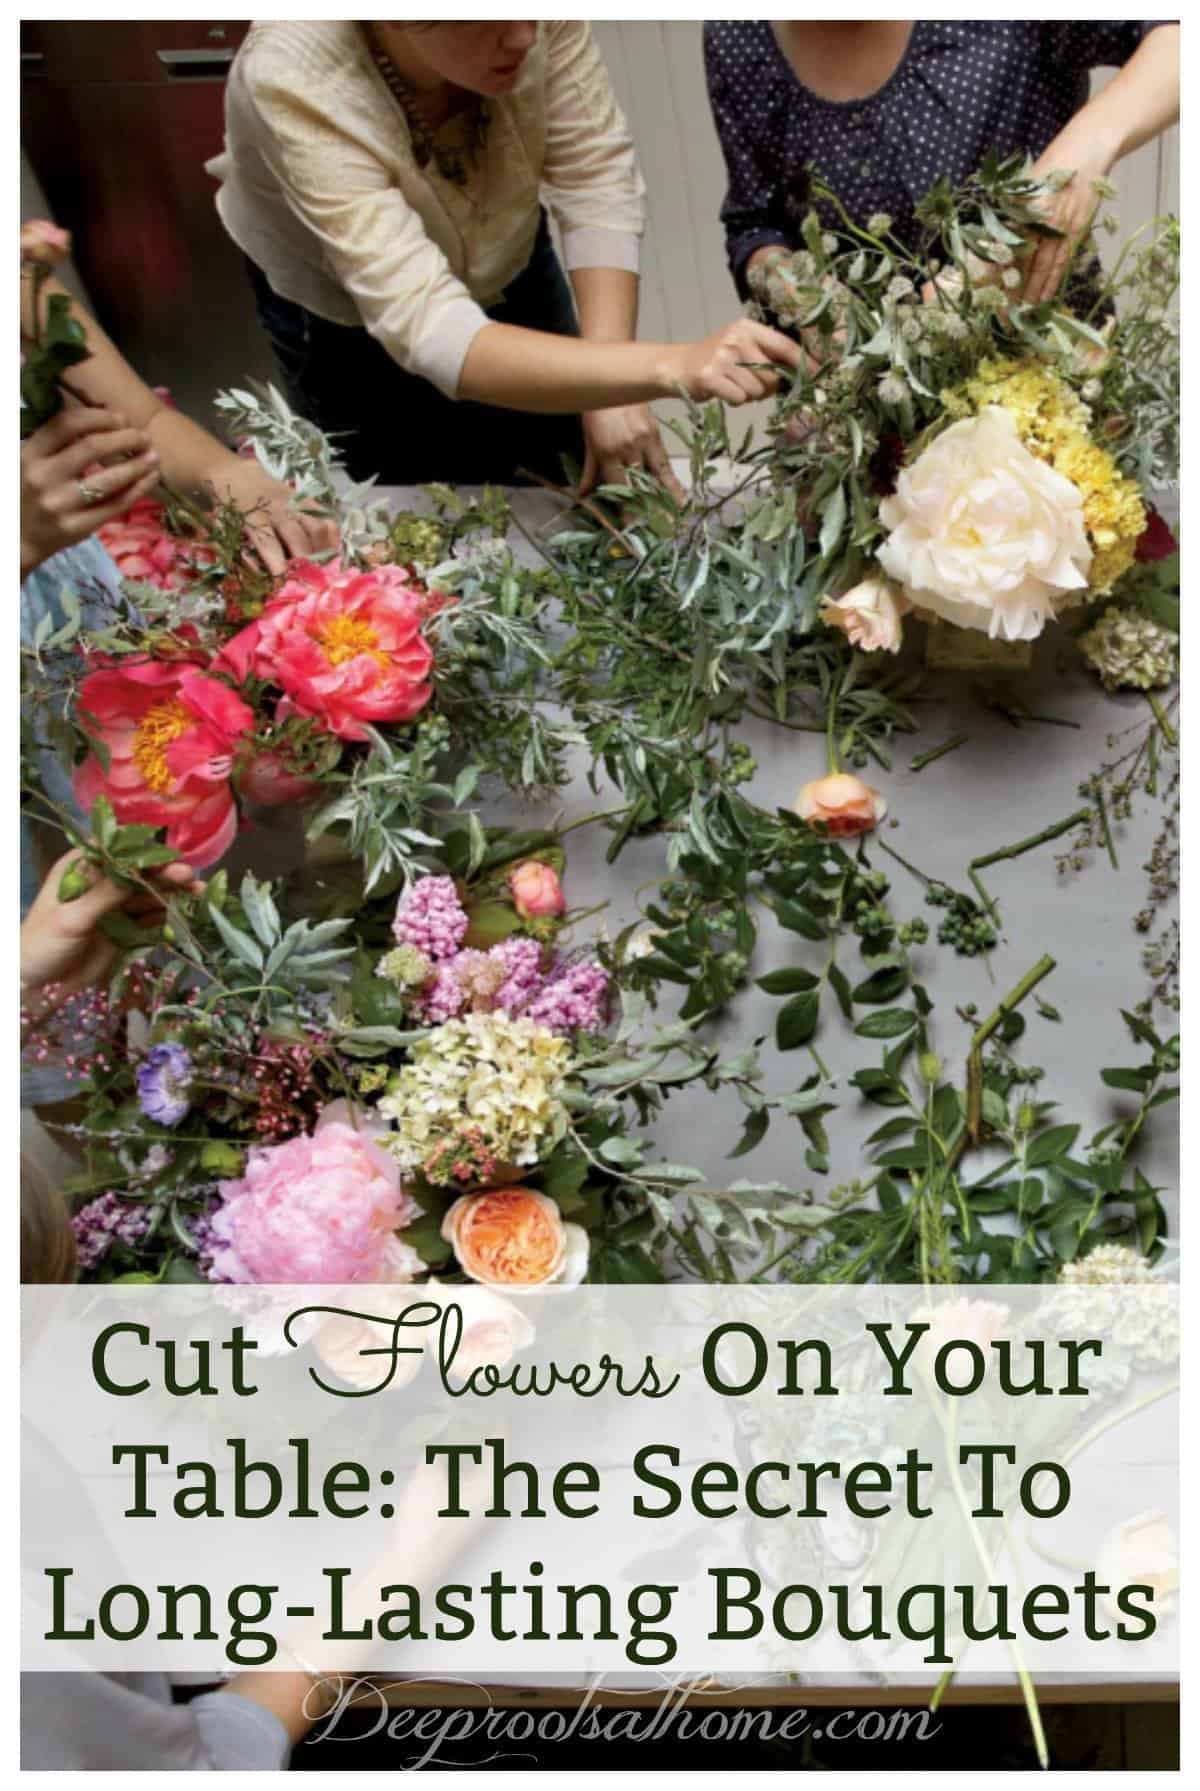 Cut Flowers On Your Table: The Secret To Long-Lasting Bouquets. The Little flower School, NYC